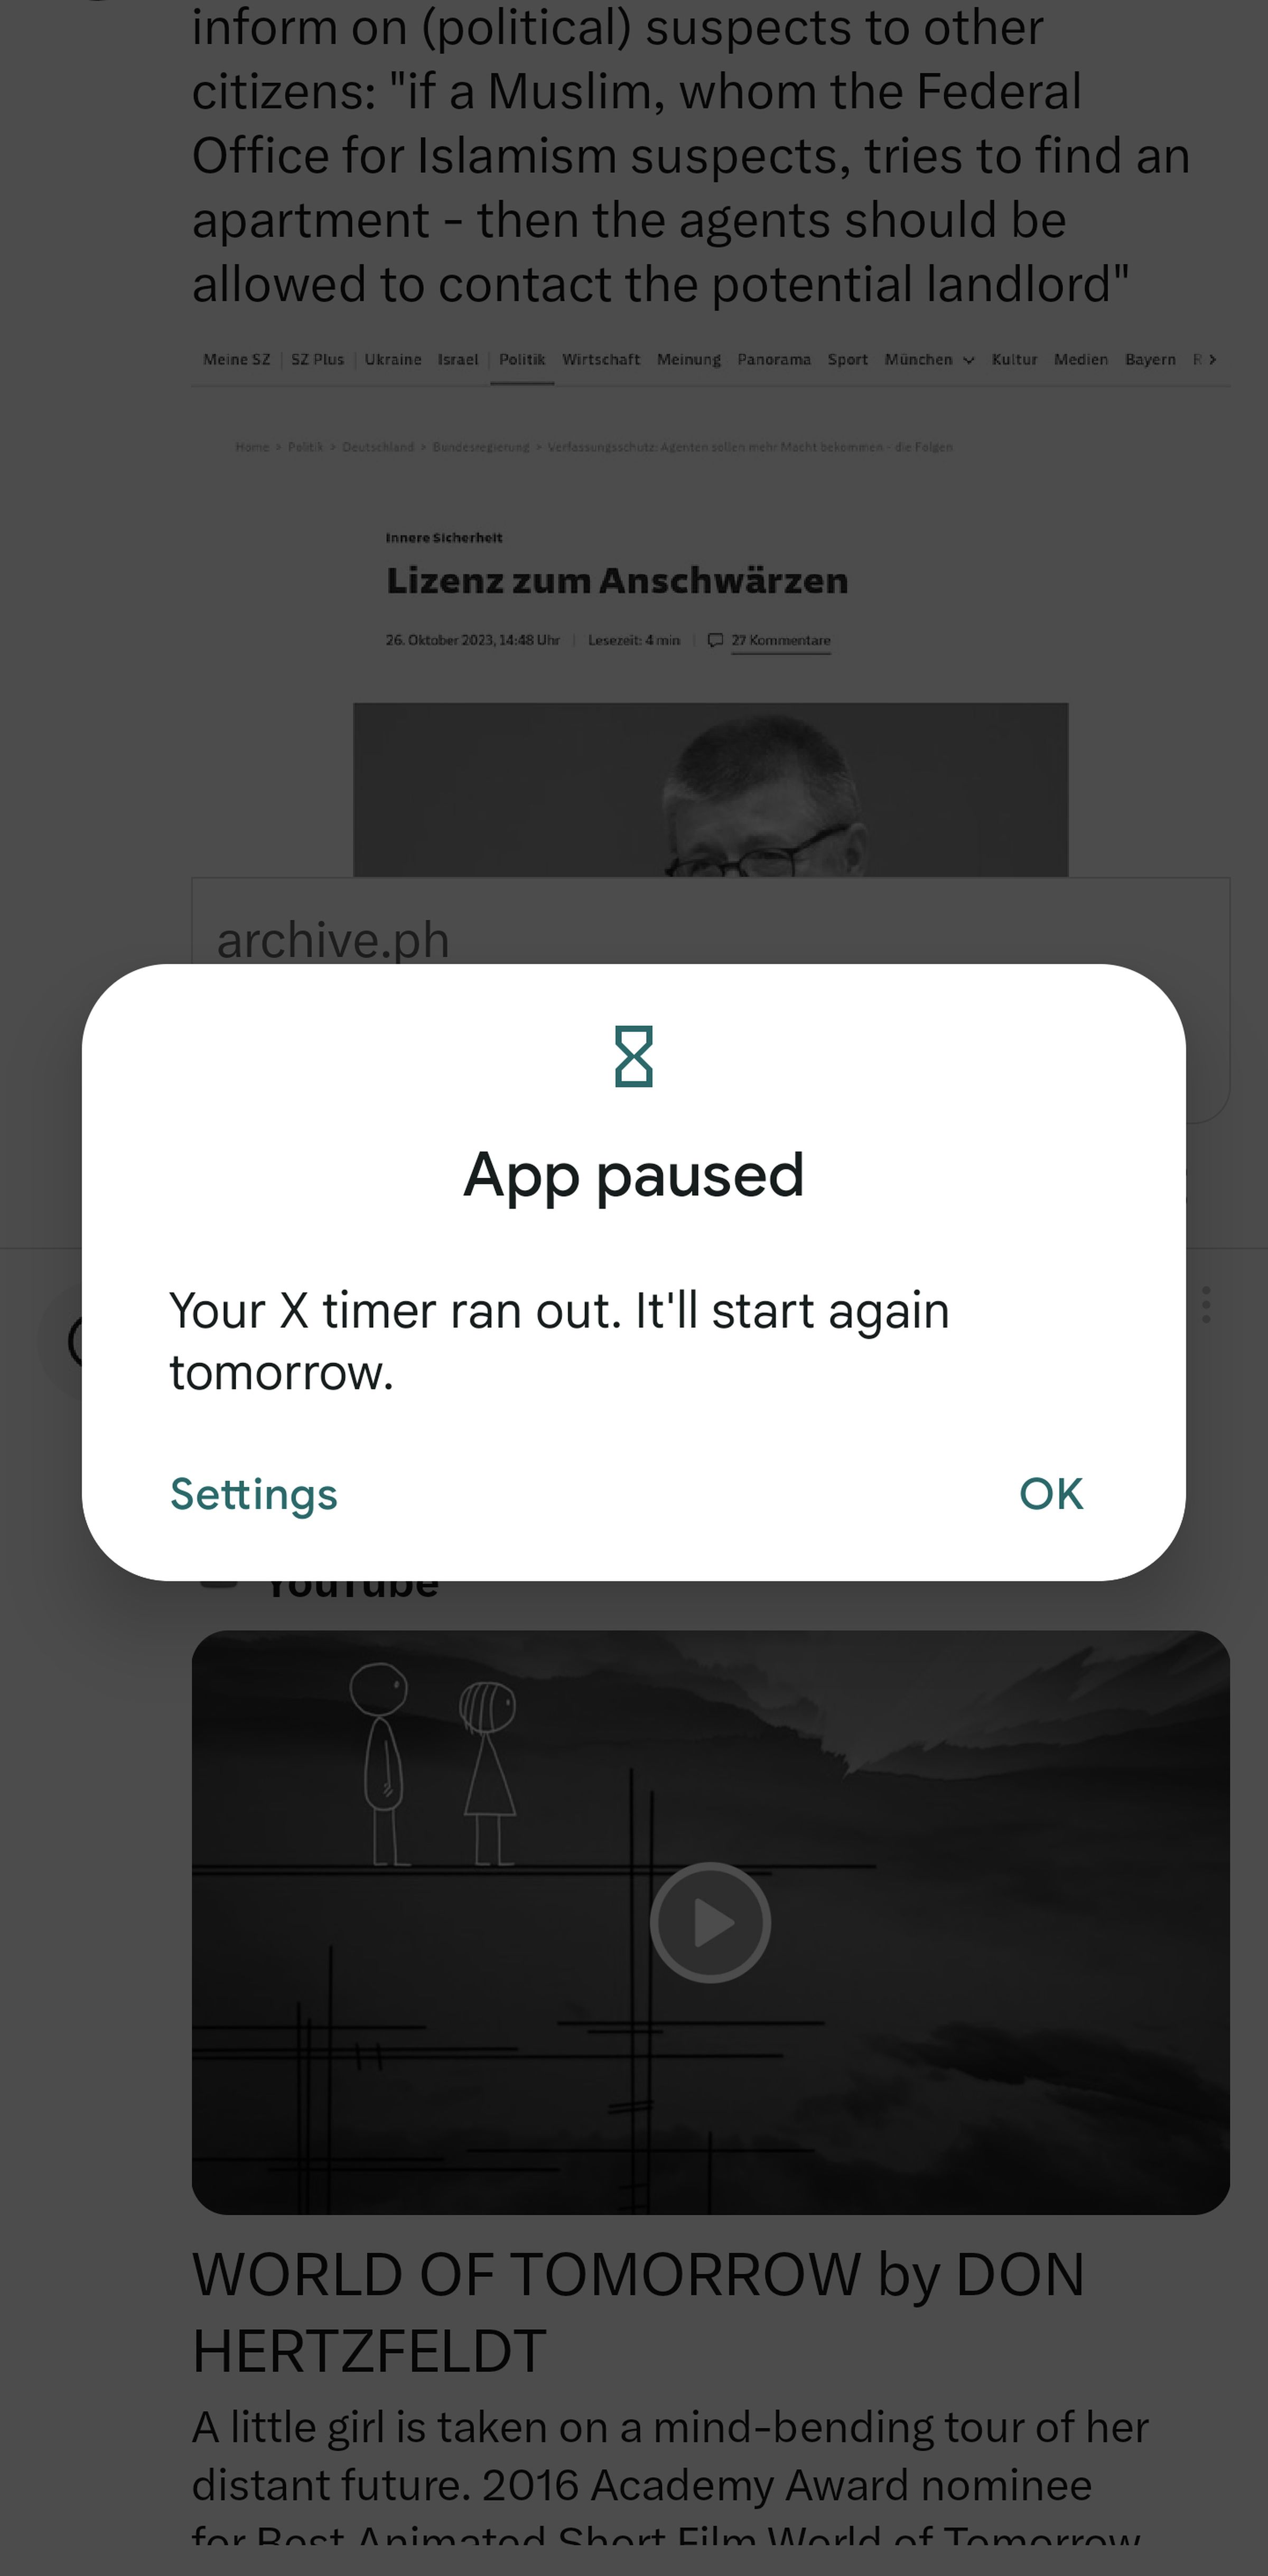 Pop-up widnows headed “App paused” and then “Your X timer ran out. It’ll start again tomorrow.”